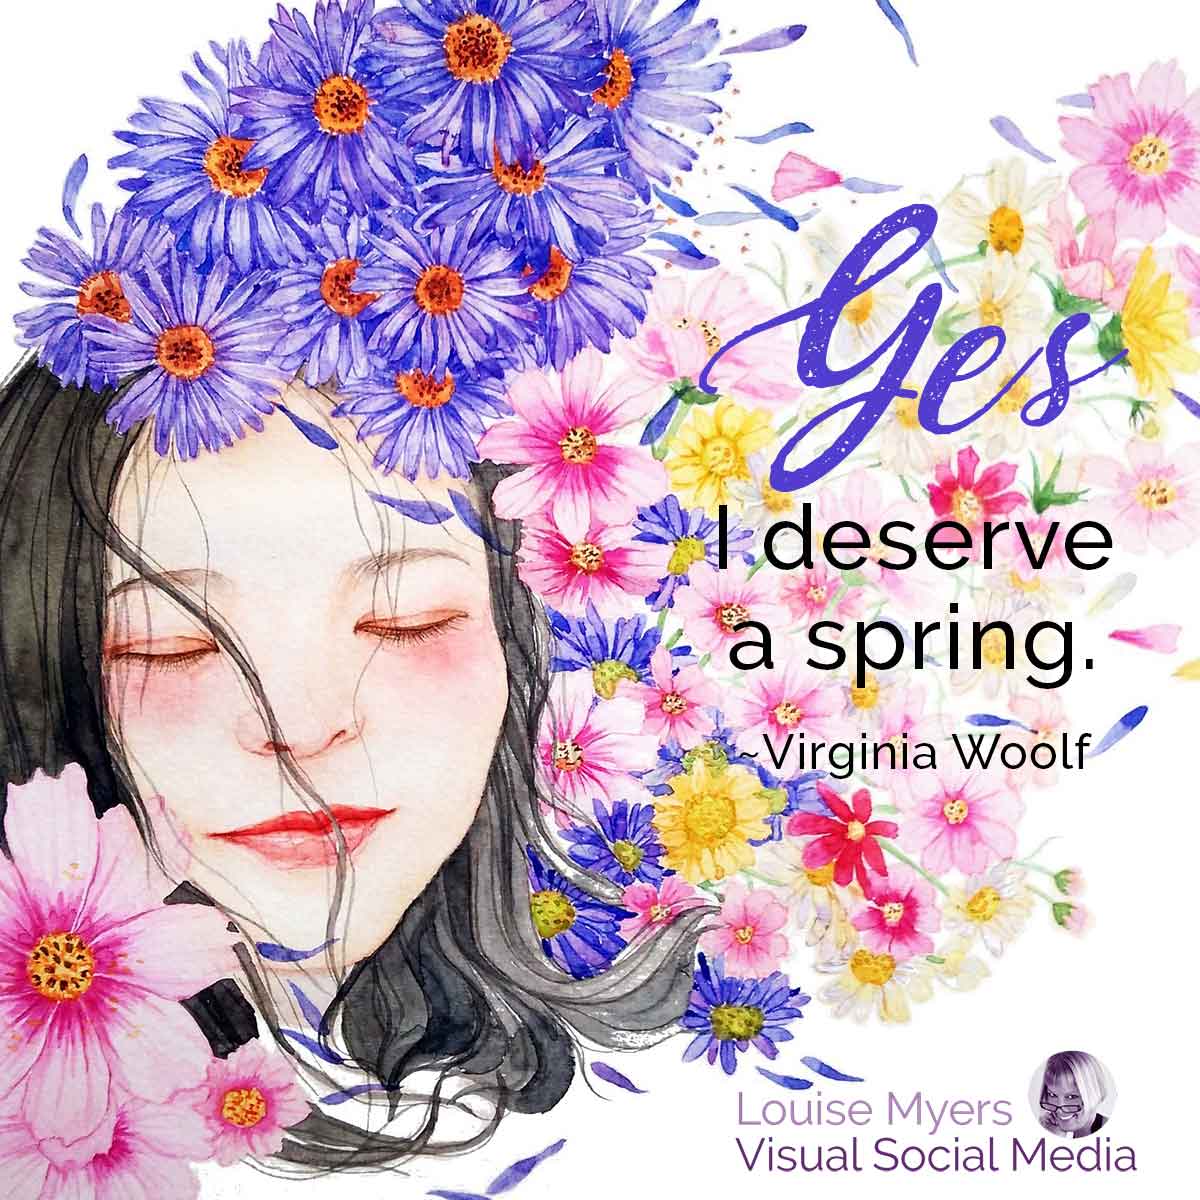 woman's face surrounded by flowers has Virginia Woolf quote Yes, I deserve a spring.